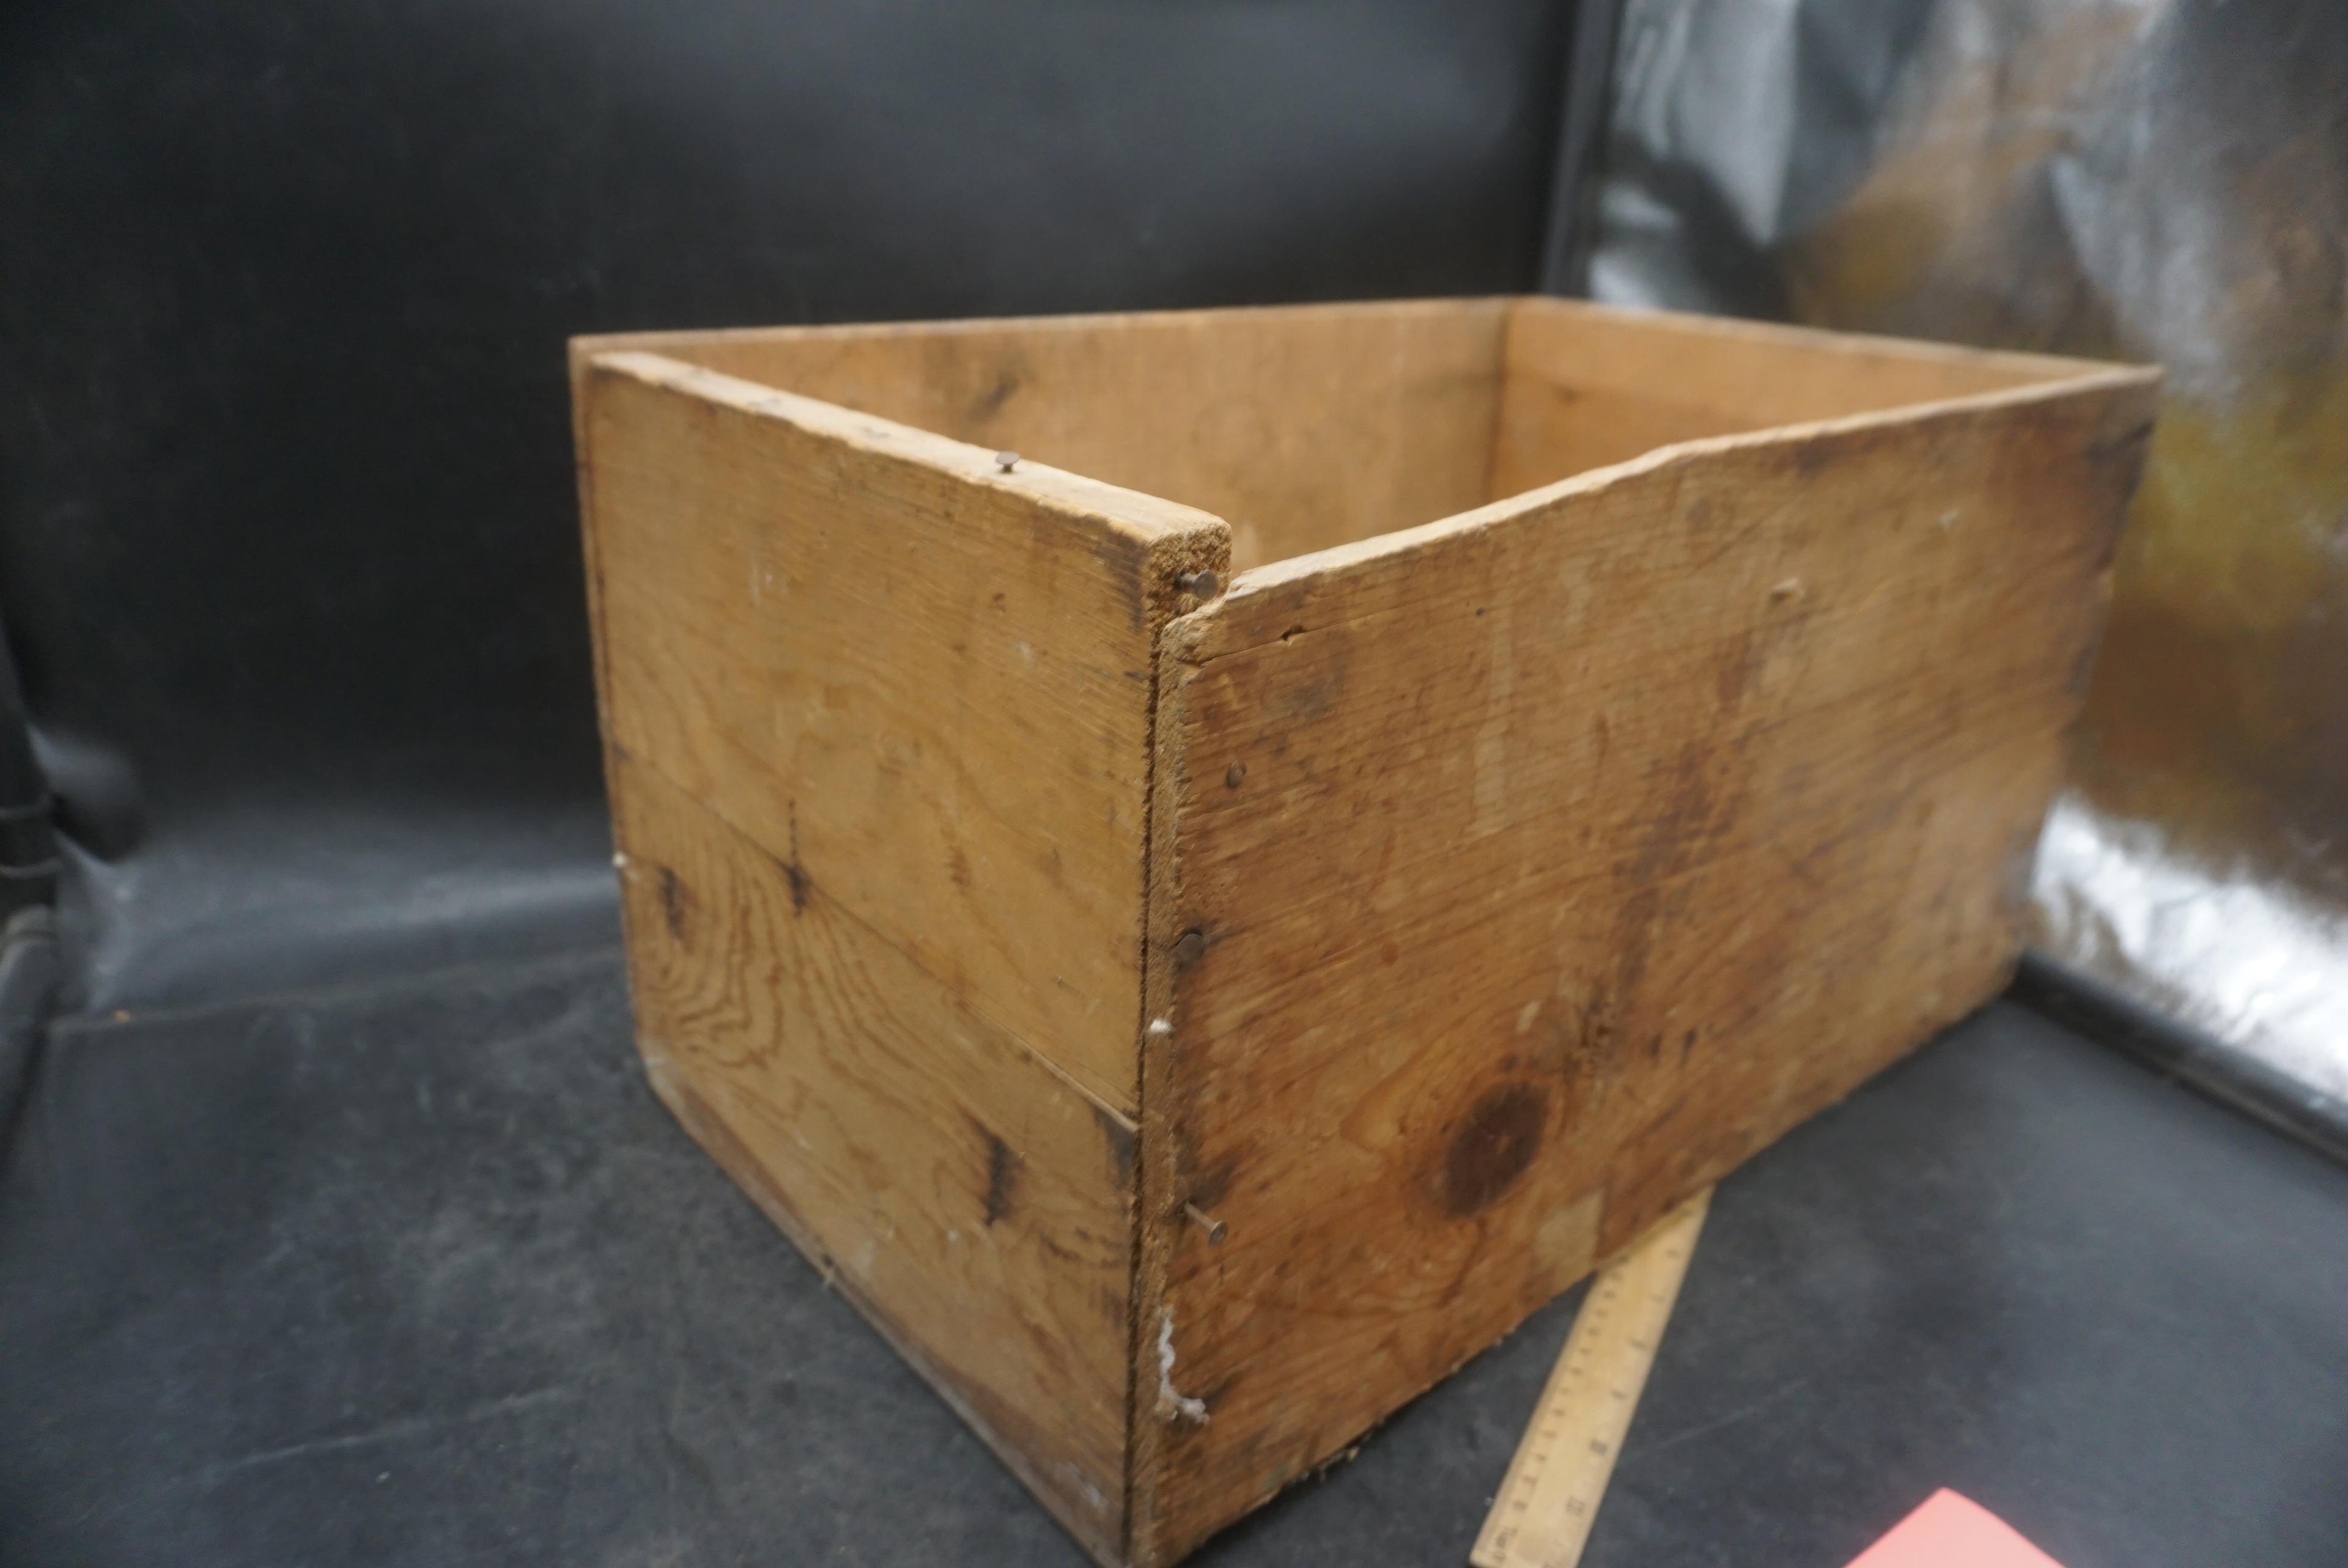 Wooden Red Crest Brand Apple Crate (Writing On Side)